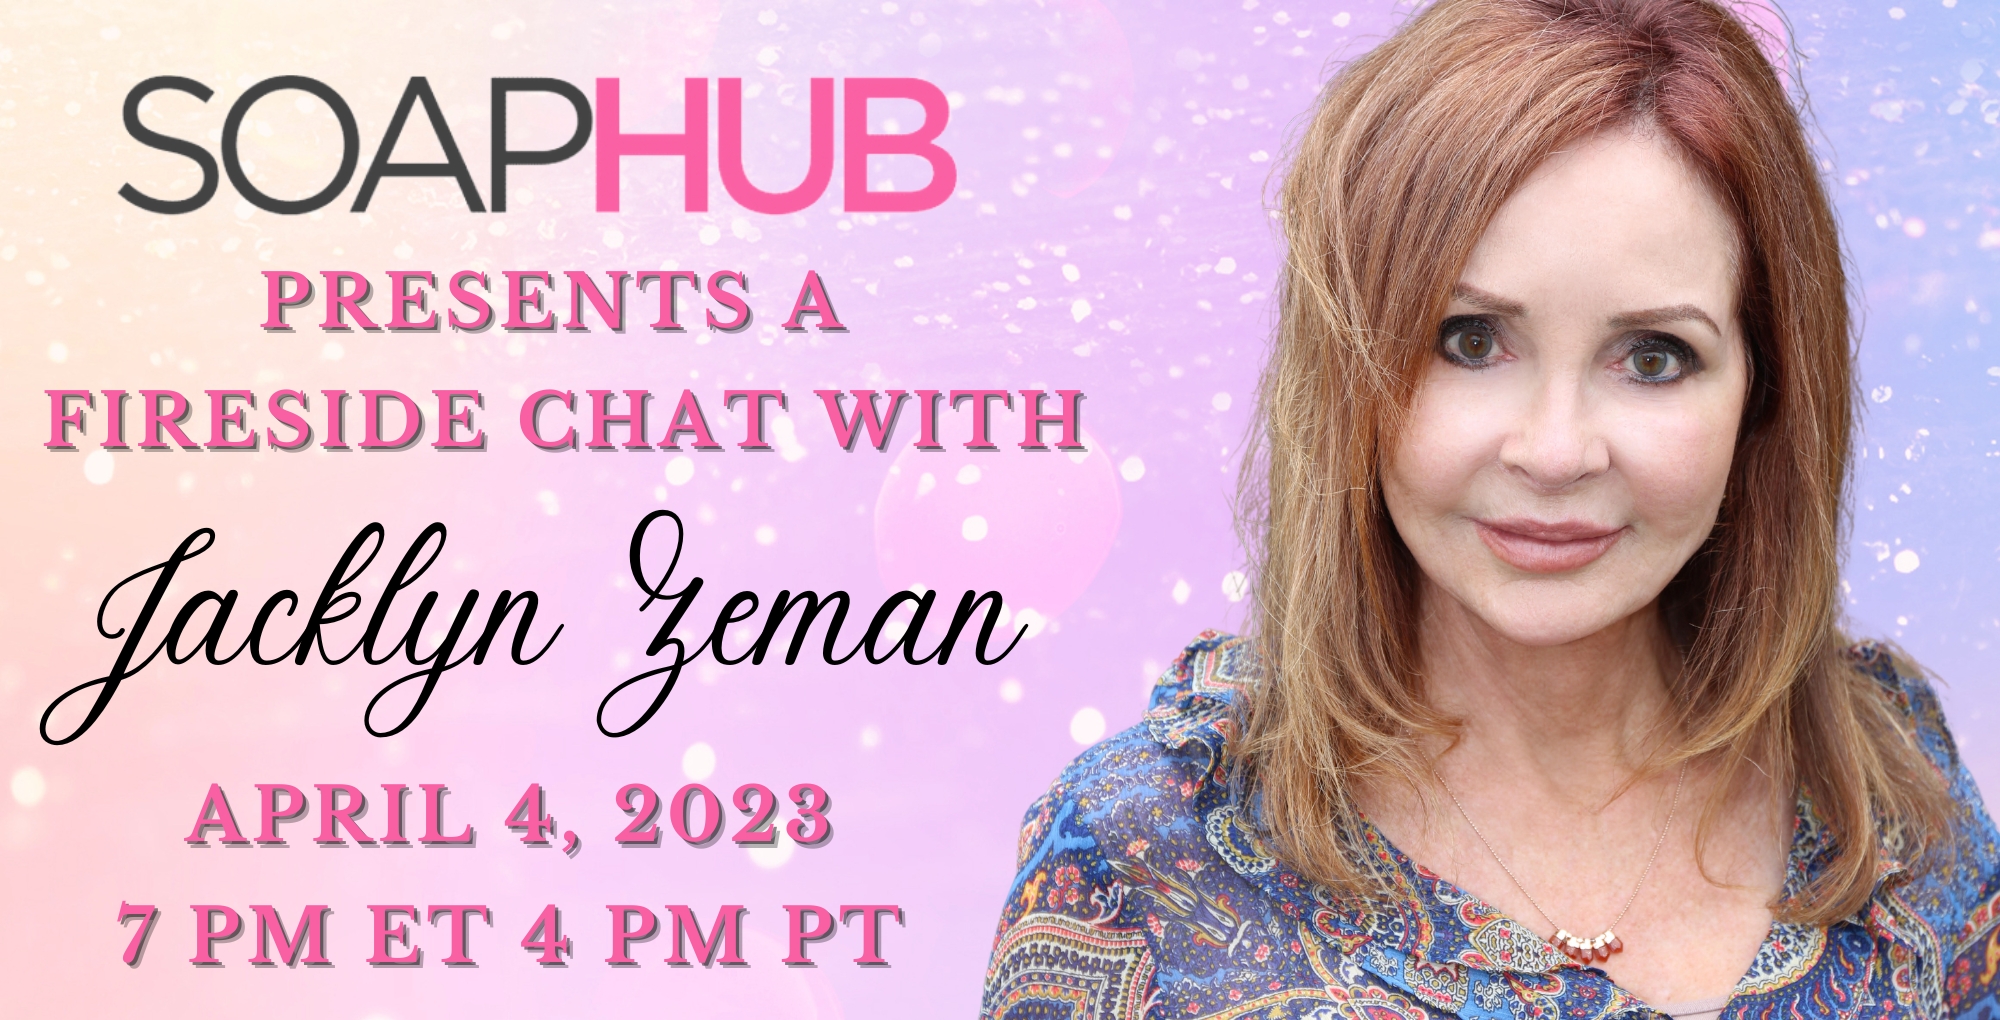 jacklyn zeman from general hospital joins soap hub for a fireside chat.